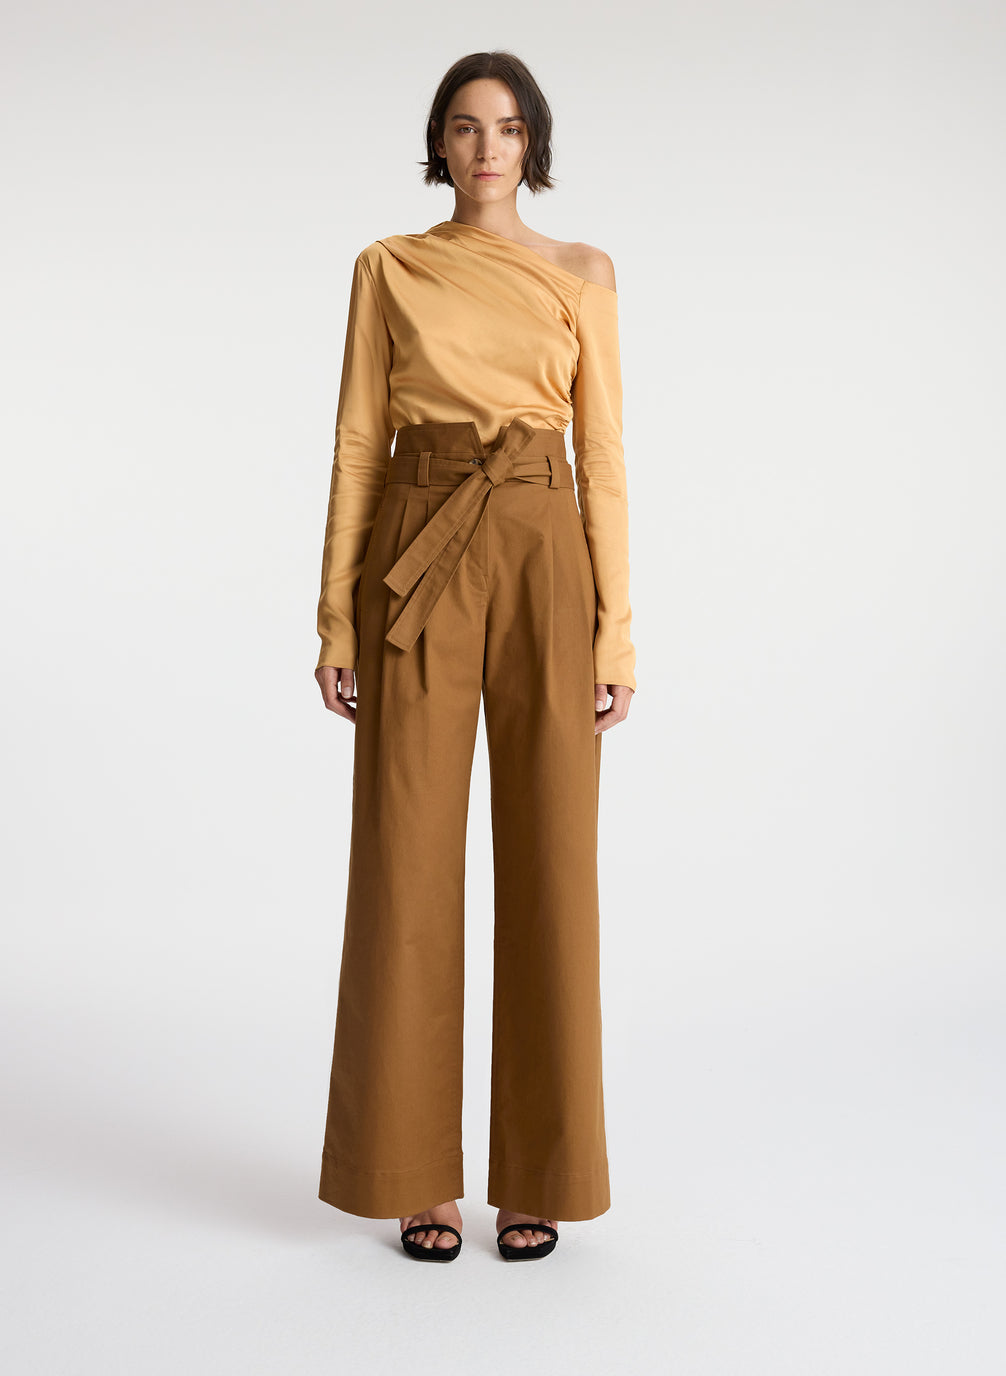 front view of woman wearing tan one shoulder long sleeve top and brown wide leg pants